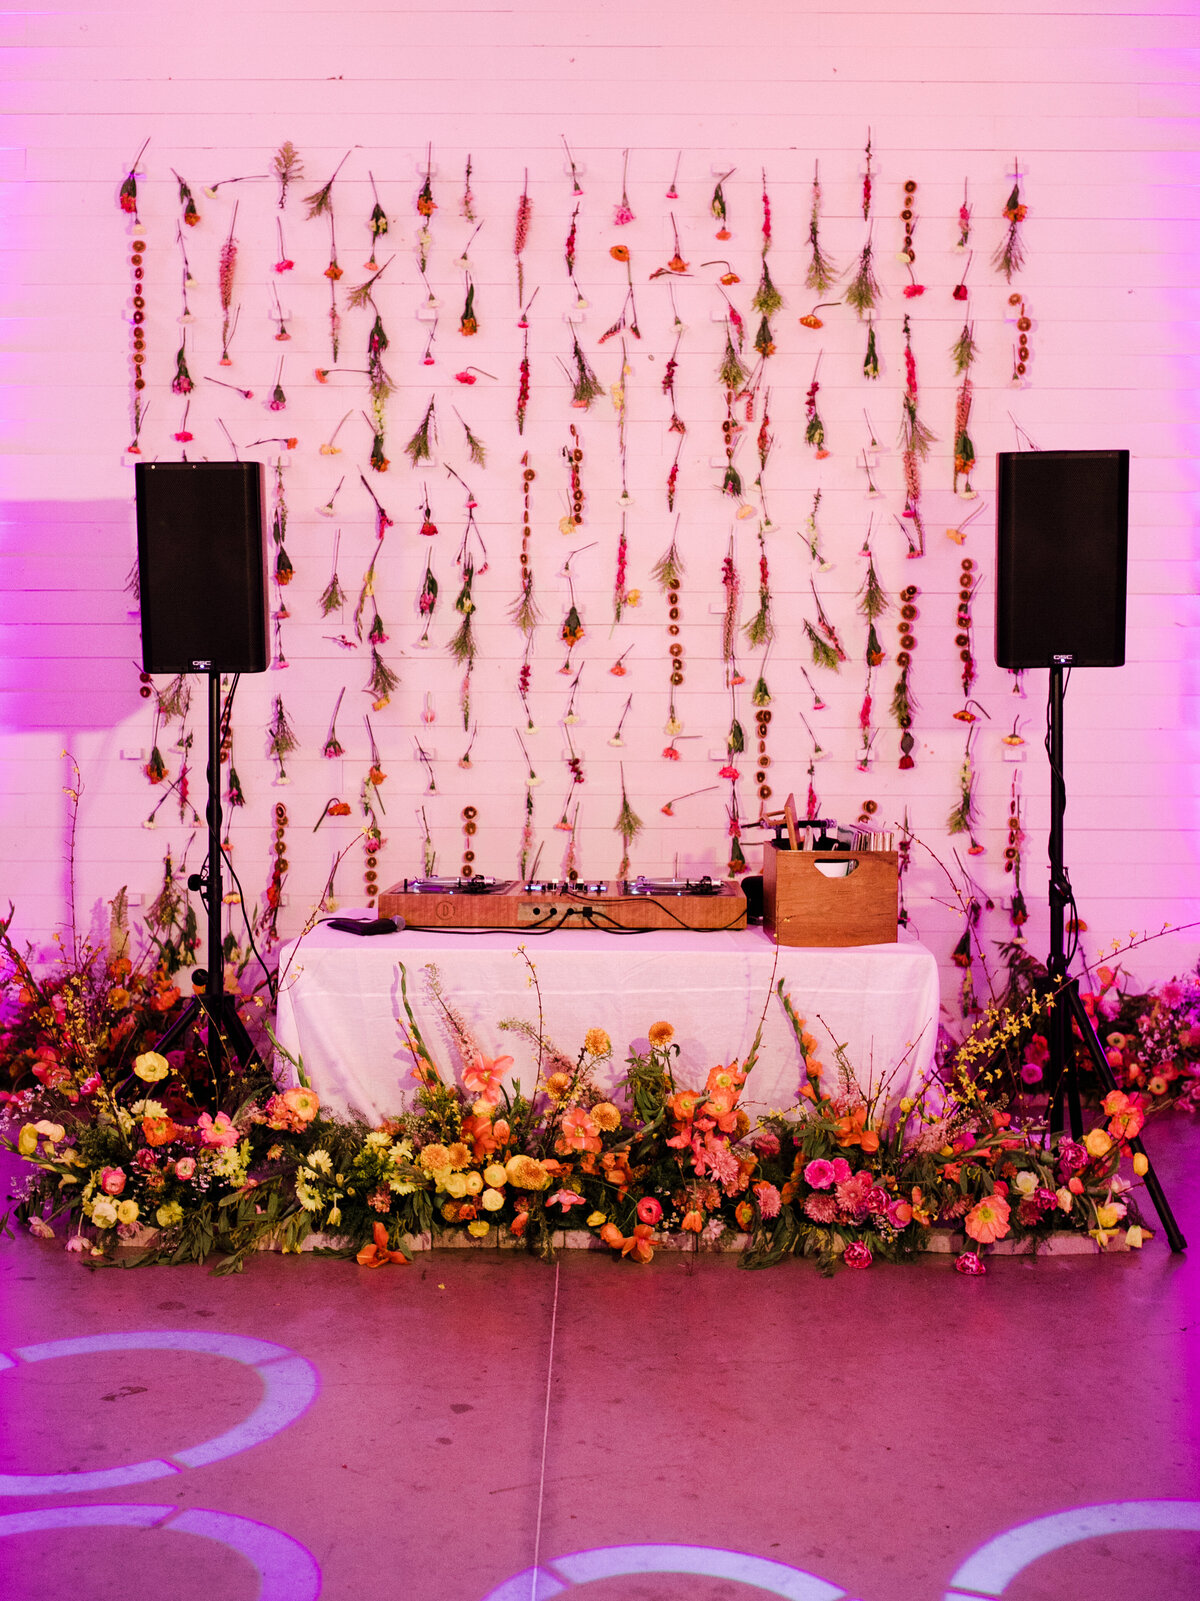 Table with colorful florals surrounding it with two speakers